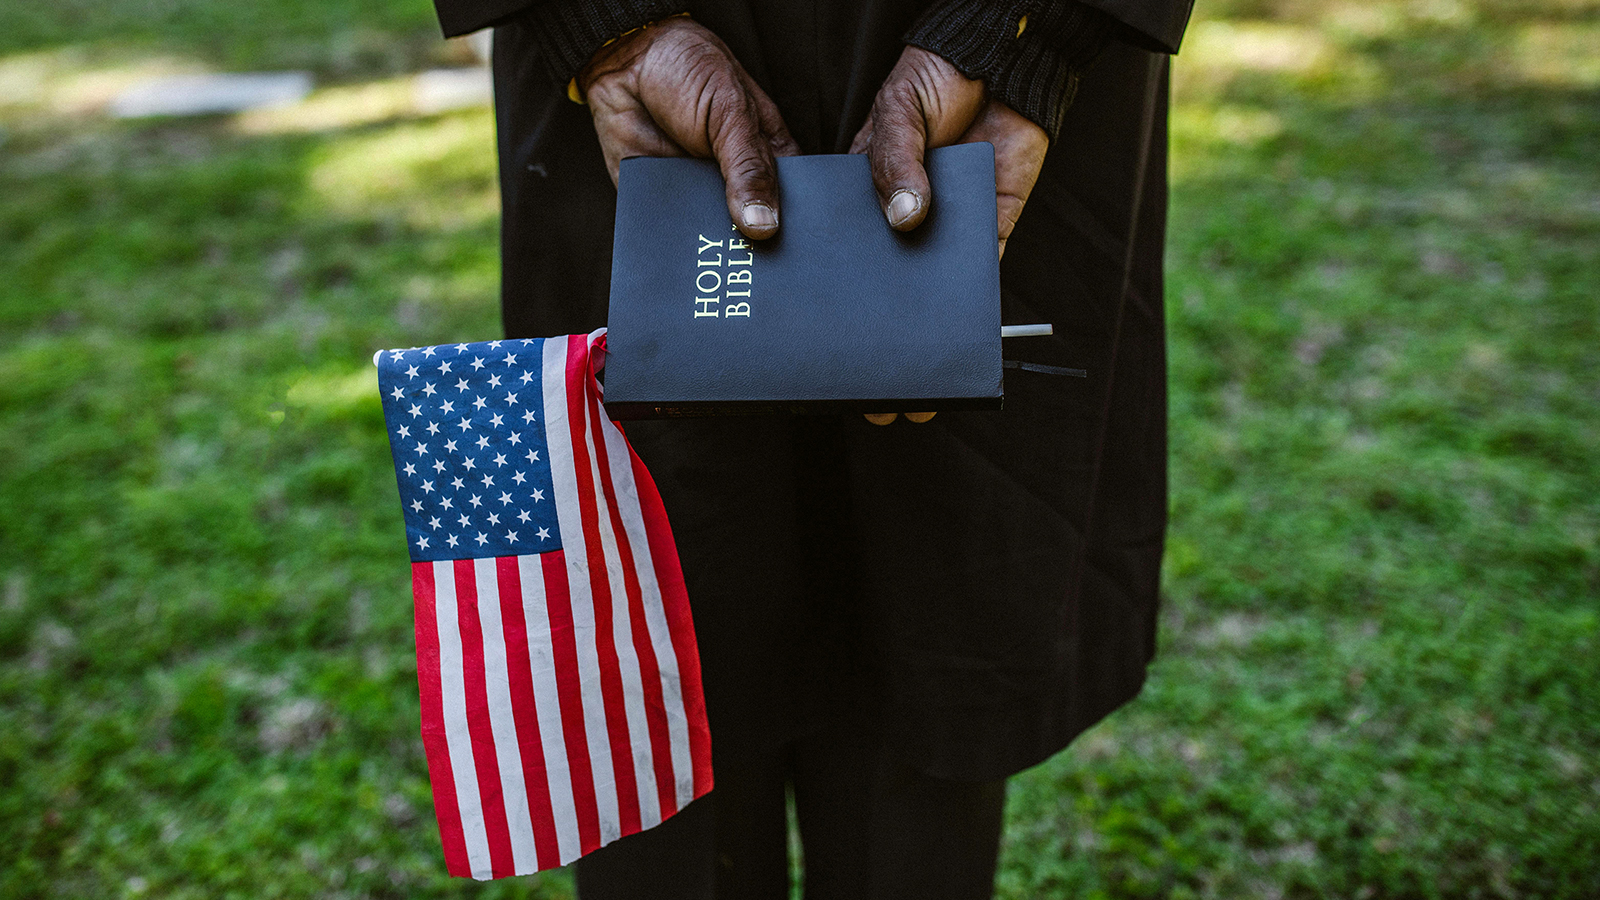 Poll: Most Americans say religion’s influence is waning, and half think that’s bad